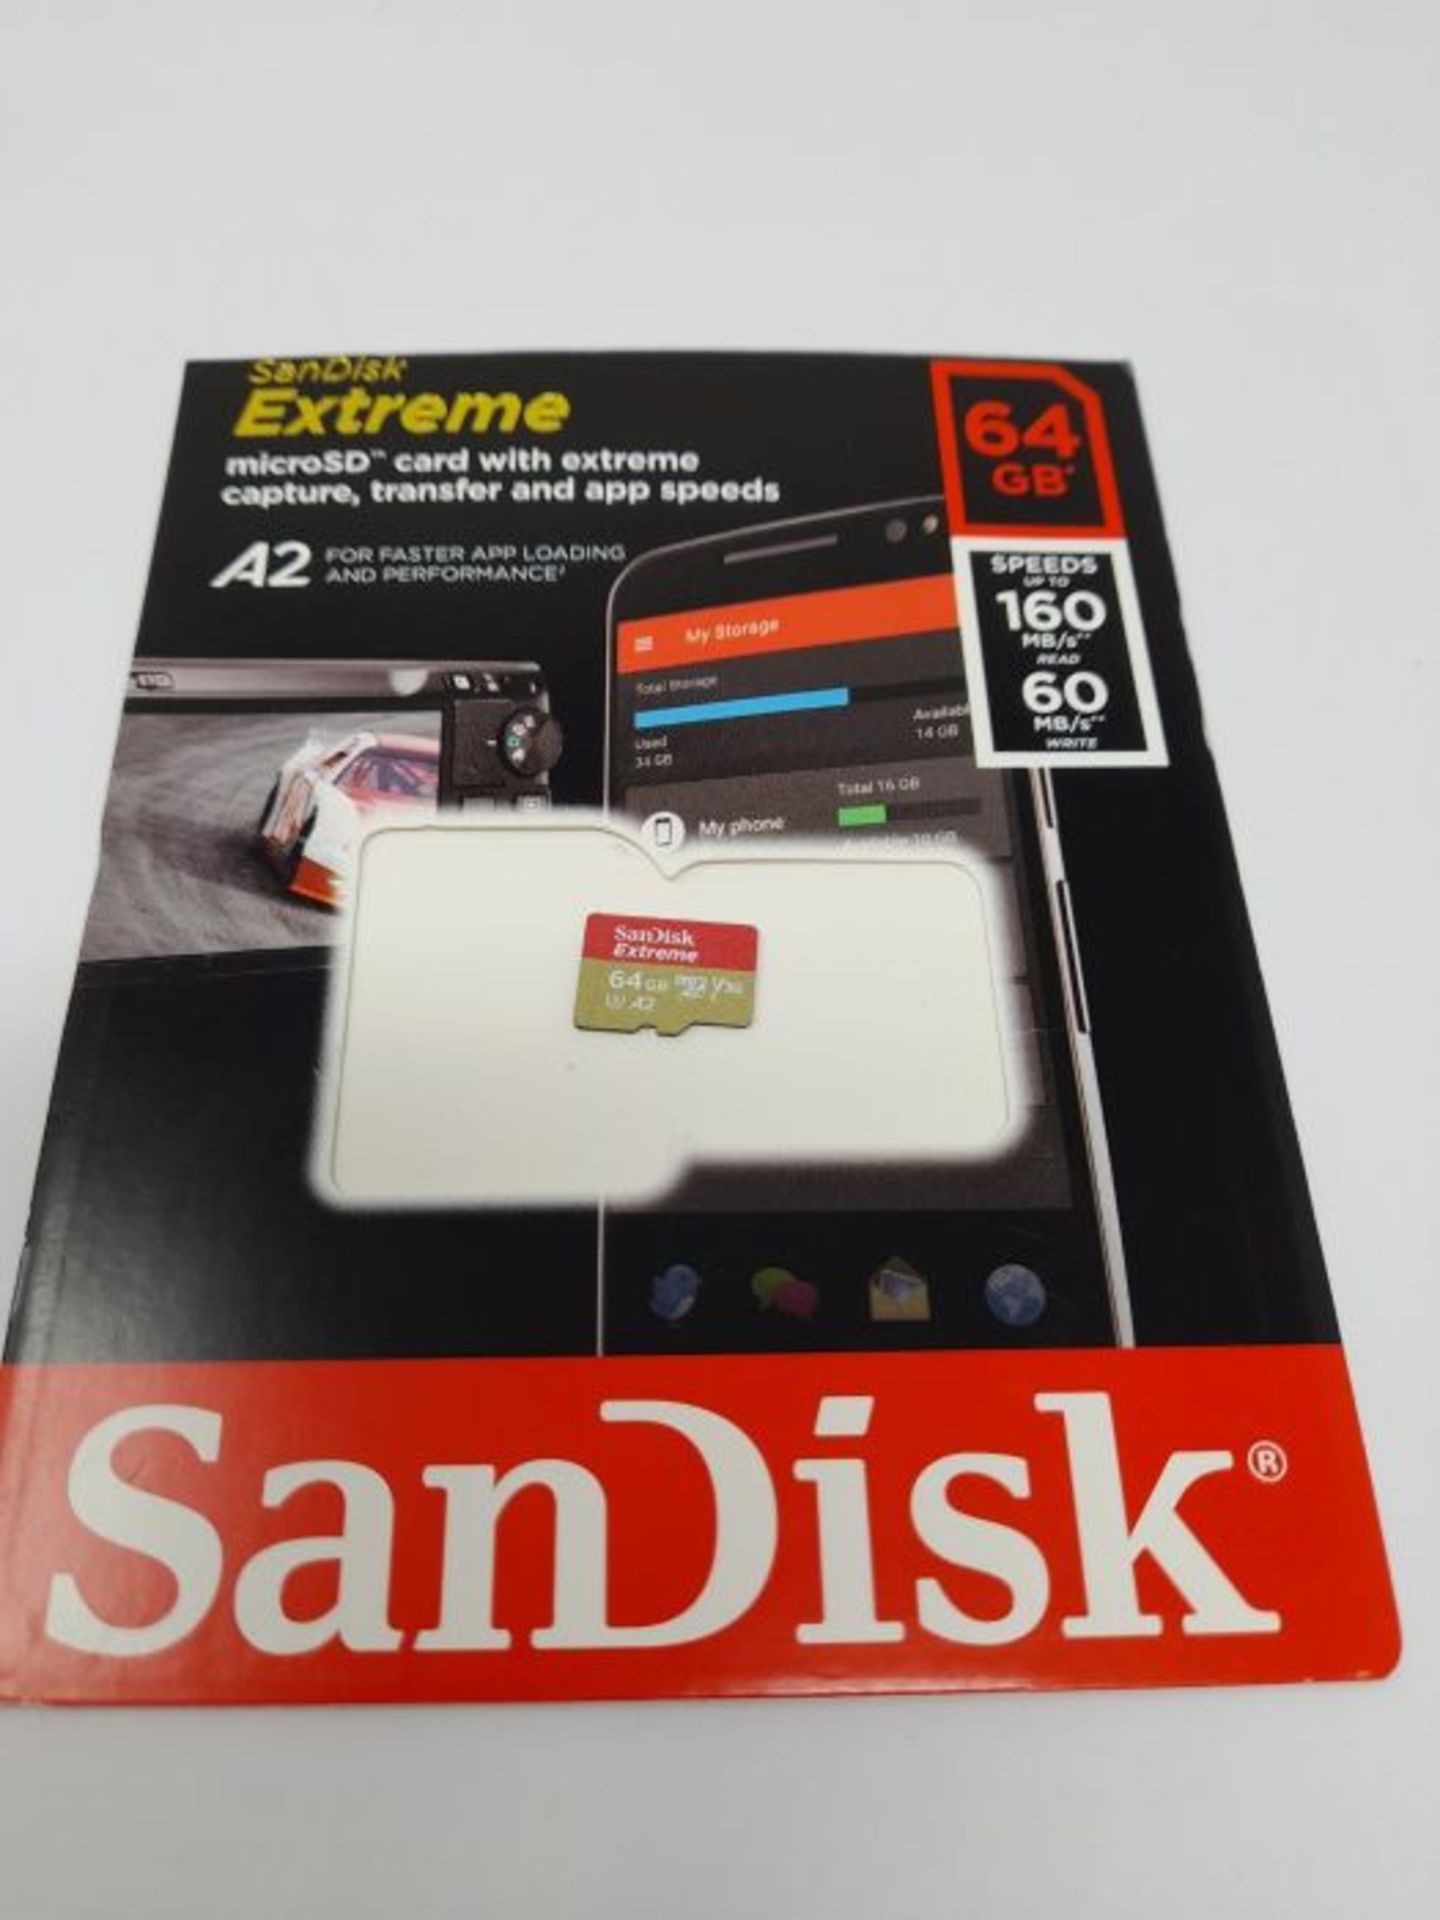 SanDisk Extreme microSDXC 64GB + SD Adapter + Rescue Pro Deluxe 160MB/s A2 C10 V30 UHS - Image 2 of 3